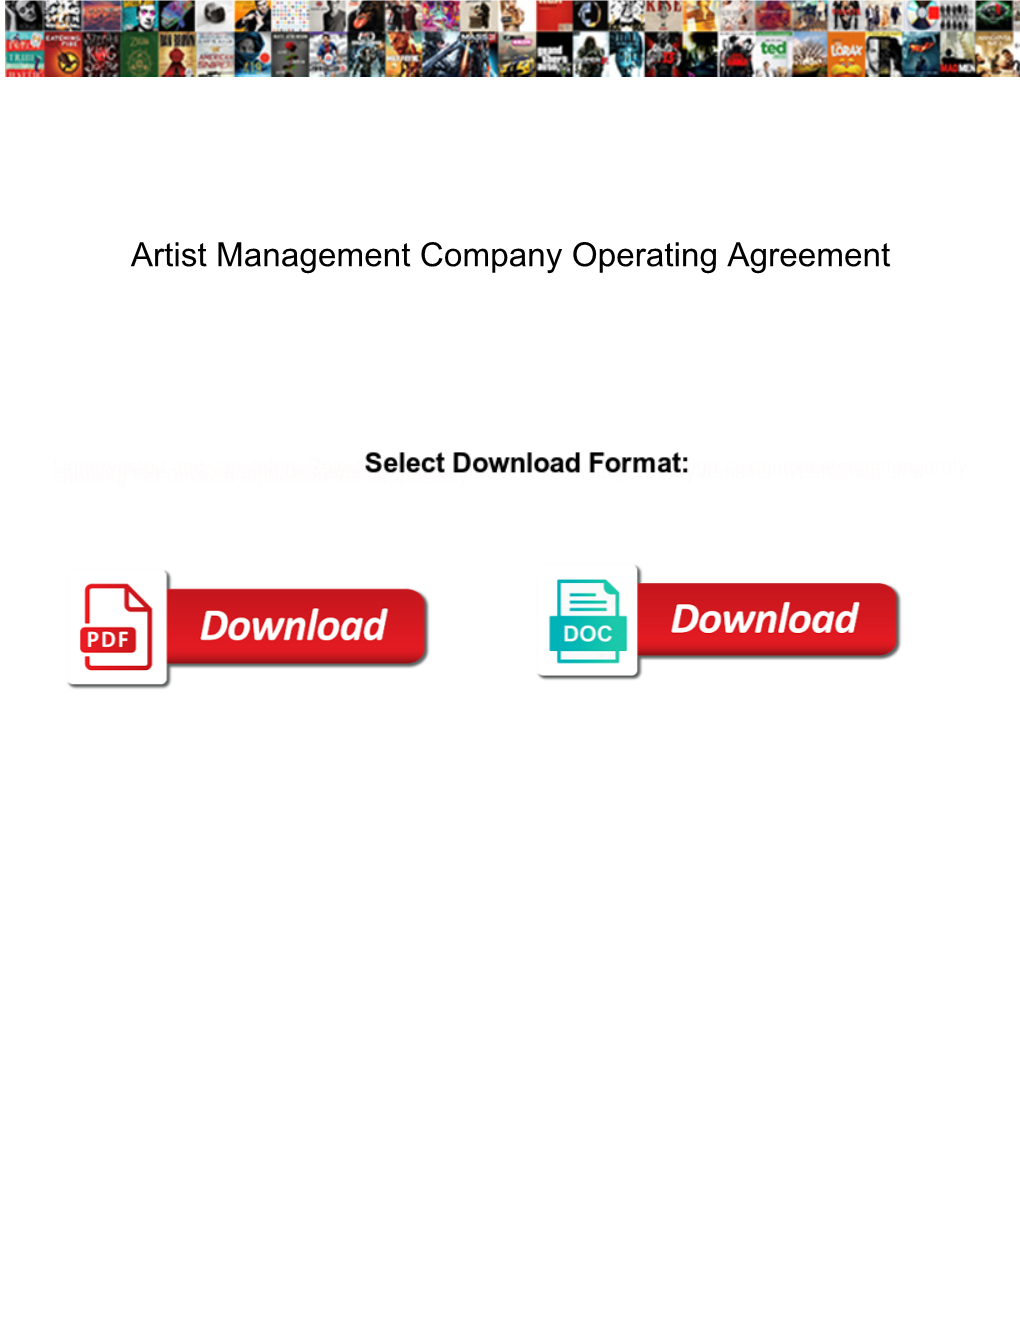 Artist Management Company Operating Agreement